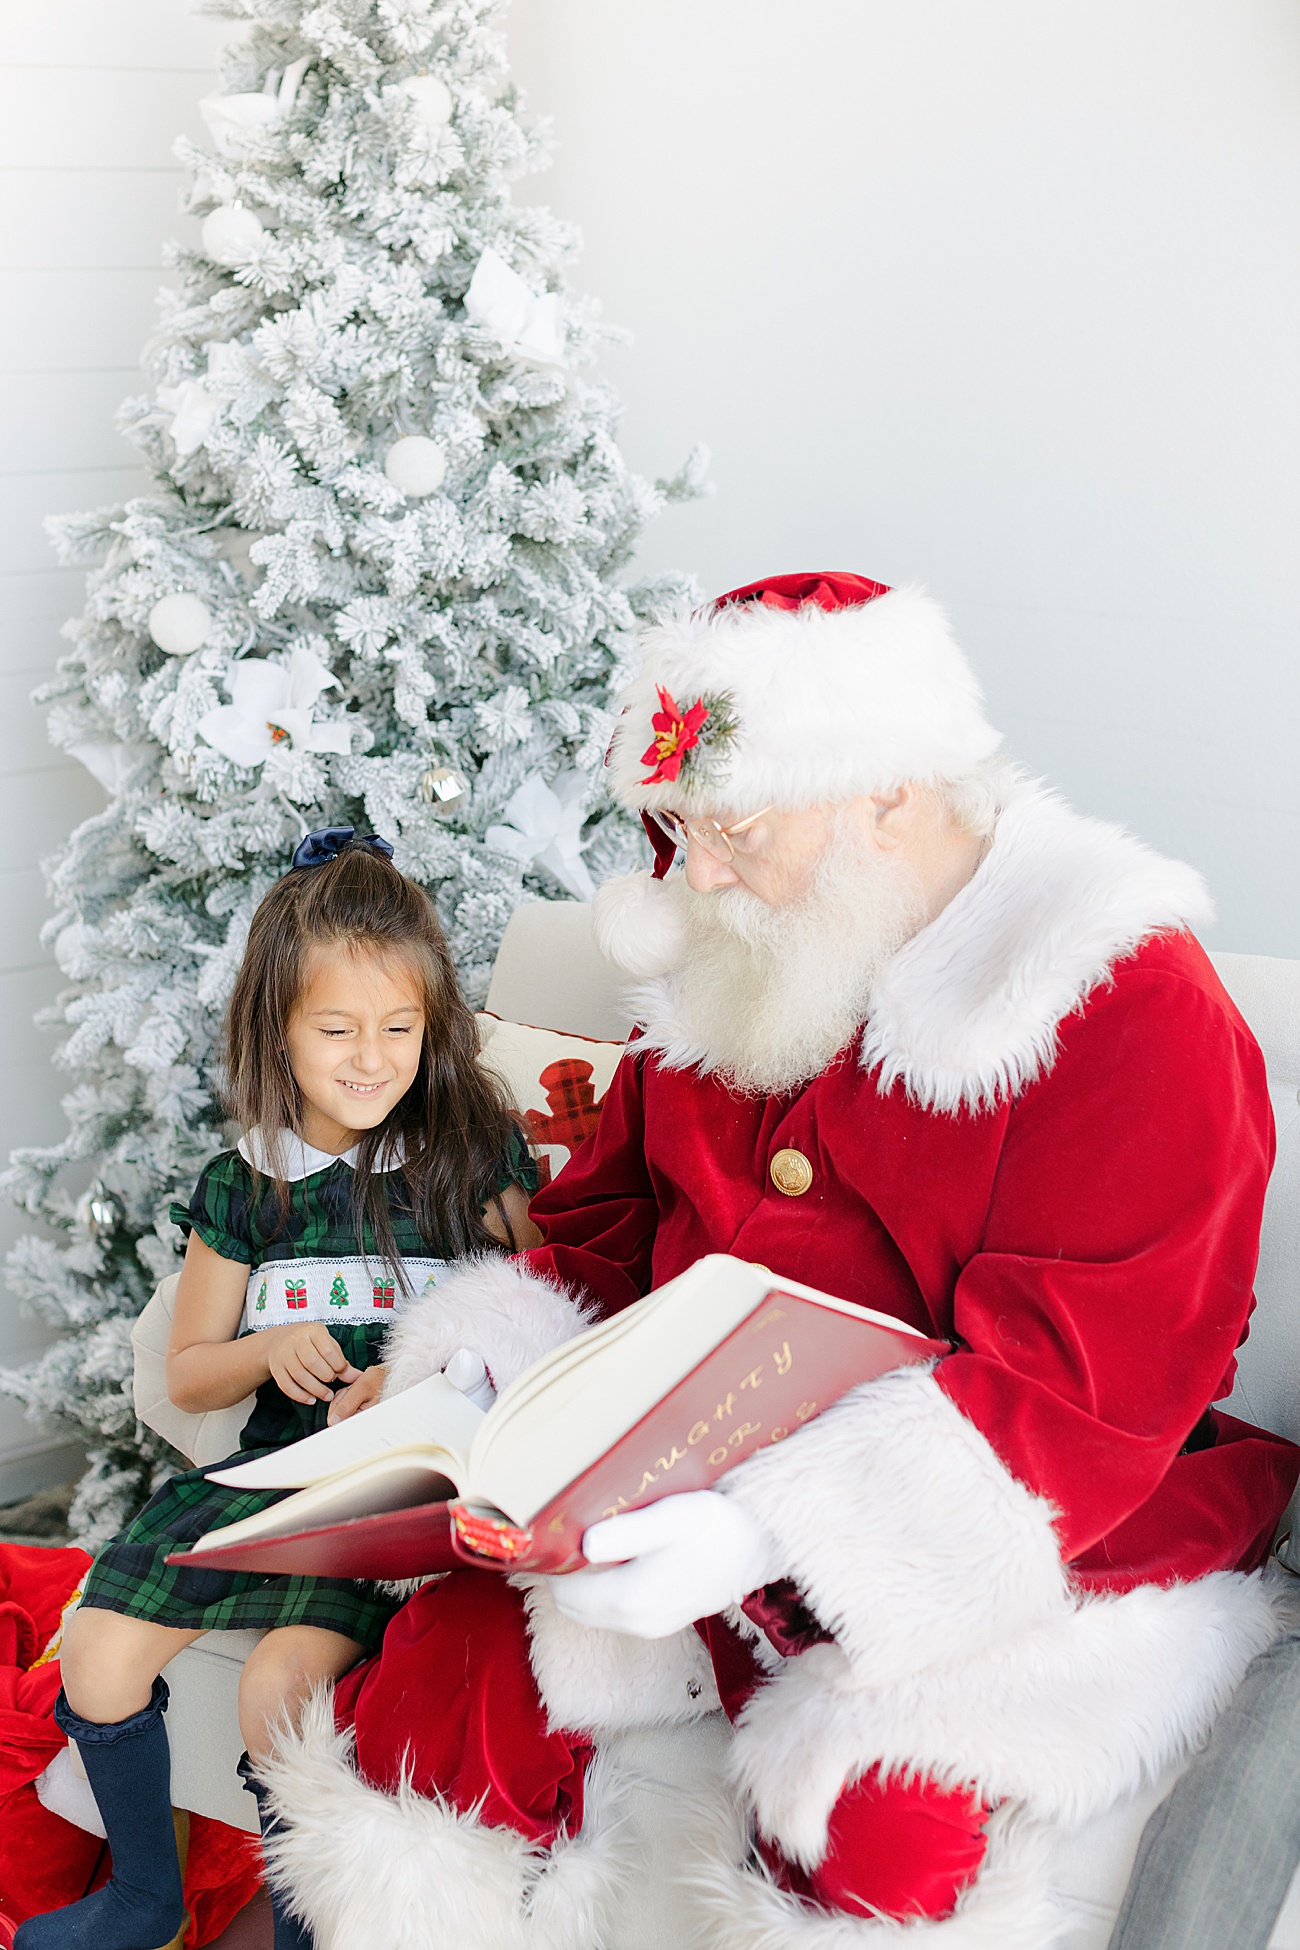 Little girl in smocked dress looking at Santa's list. Photo by Sana Ahmed Photography.